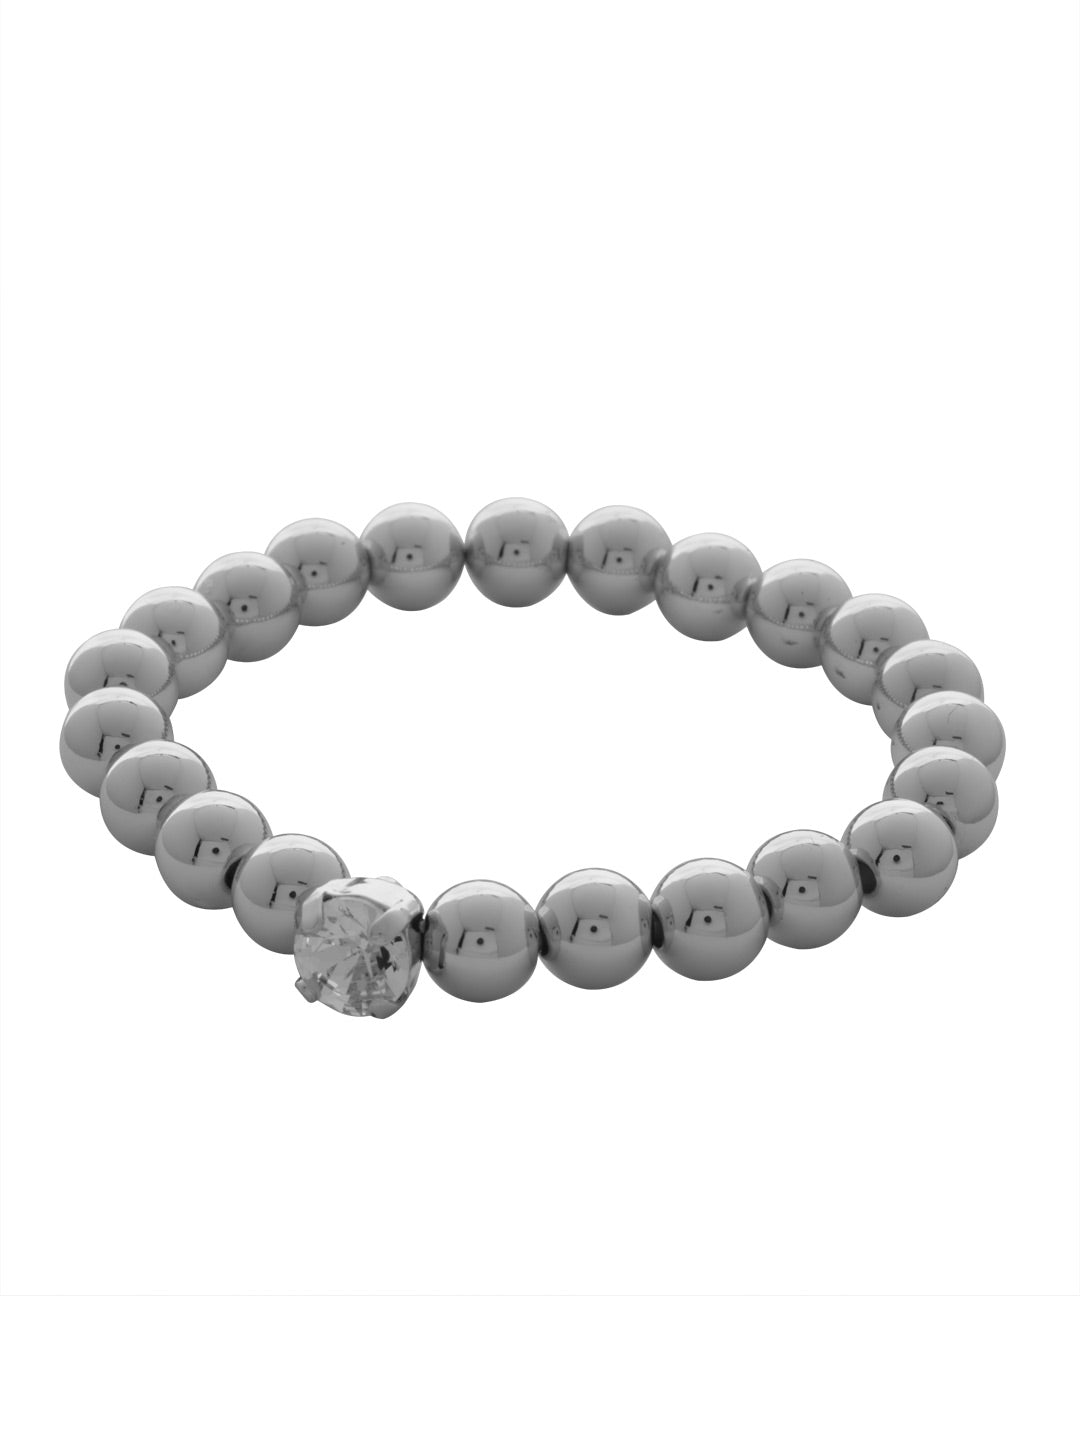 Single Crystal Stretch Bracelet - 4BFJ21PDCRY - <p>Single Crystal Stretch Bracelet features repeating metal beads and a single round cut crystal on a multi-layered stretchy jewelry filament, creating a durable and trendy piece. From Sorrelli's Crystal collection in our Palladium finish.</p>